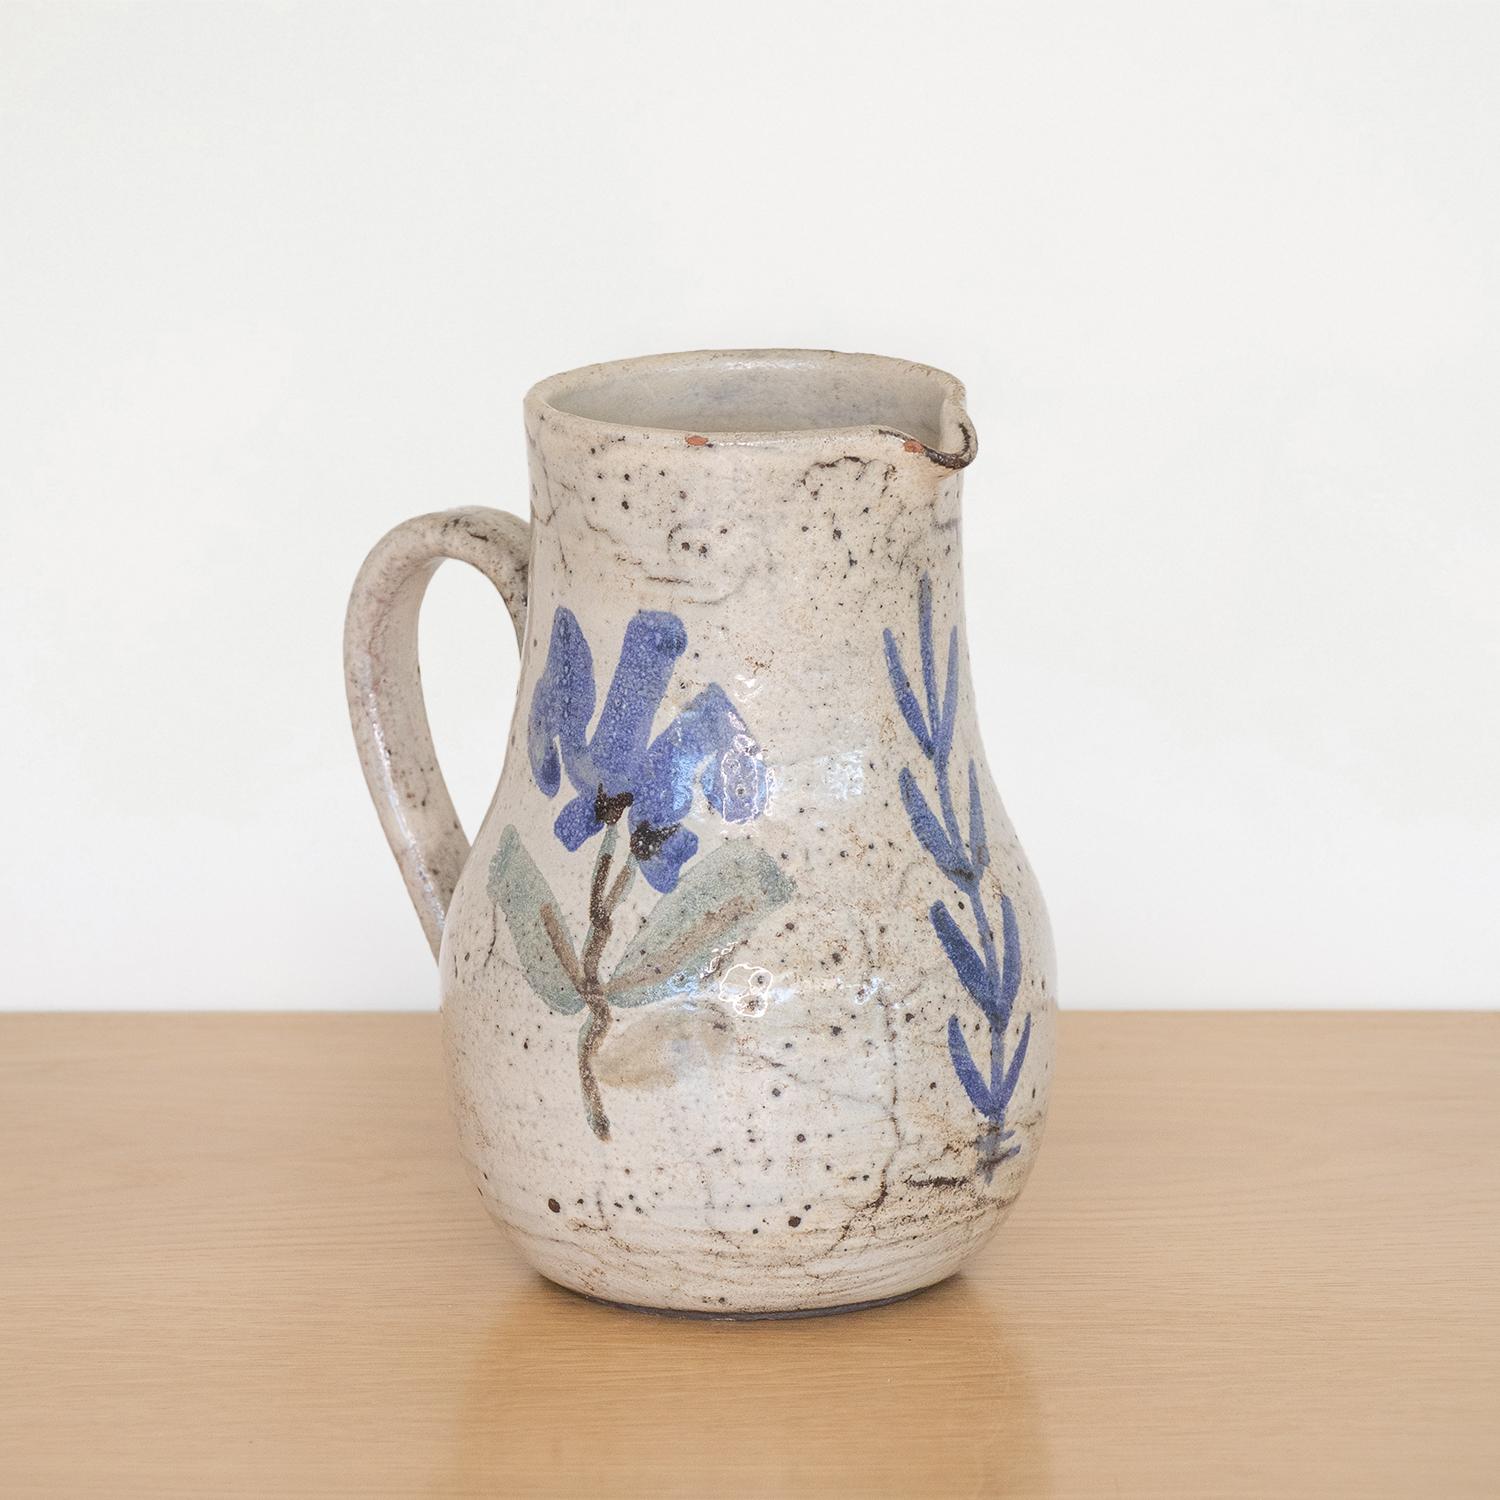 Beautiful painted ceramic pitcher from France, 1950s. Curved handle and spout with hand painted flower motif in blue and grey coloring. Made by French ceramic artist Gustave Reynaud.